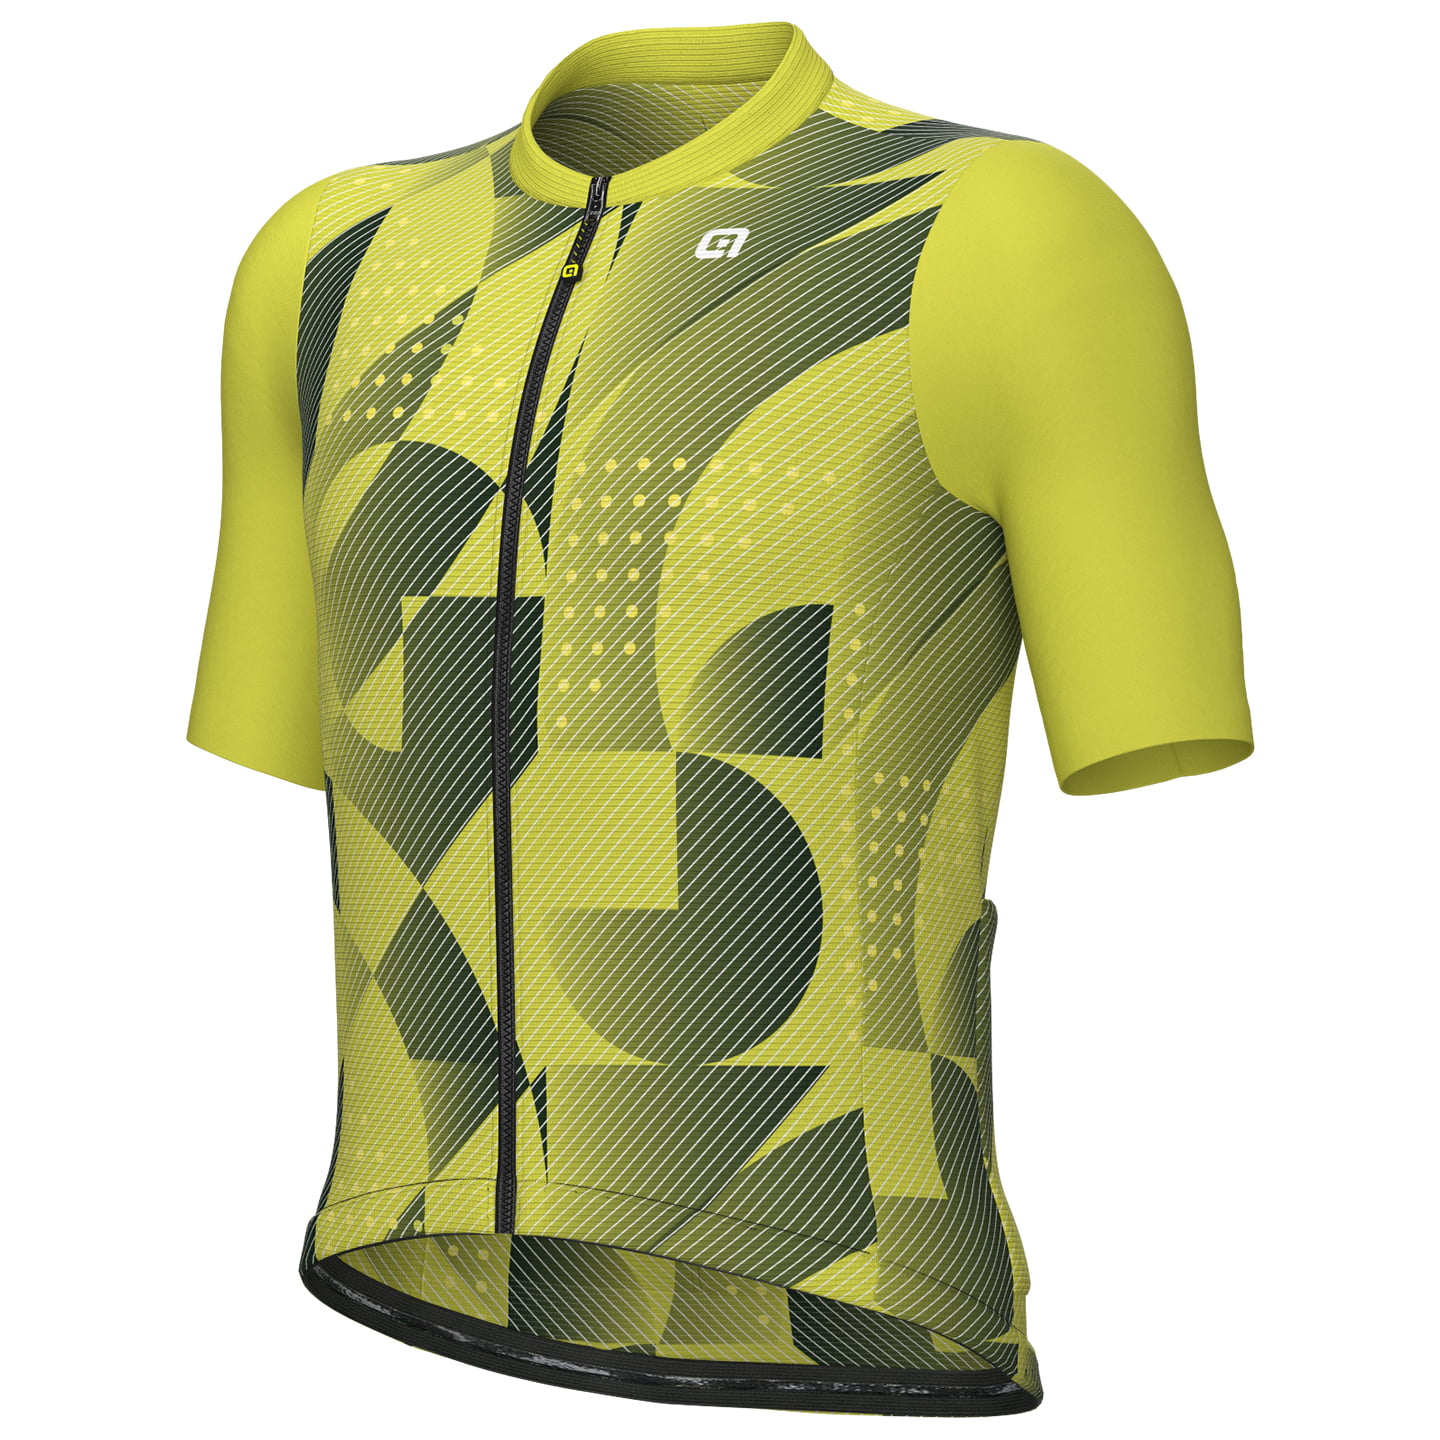 ALE Enjoy Short Sleeve Jersey, for men, size L, Cycling jersey, Cycling clothing